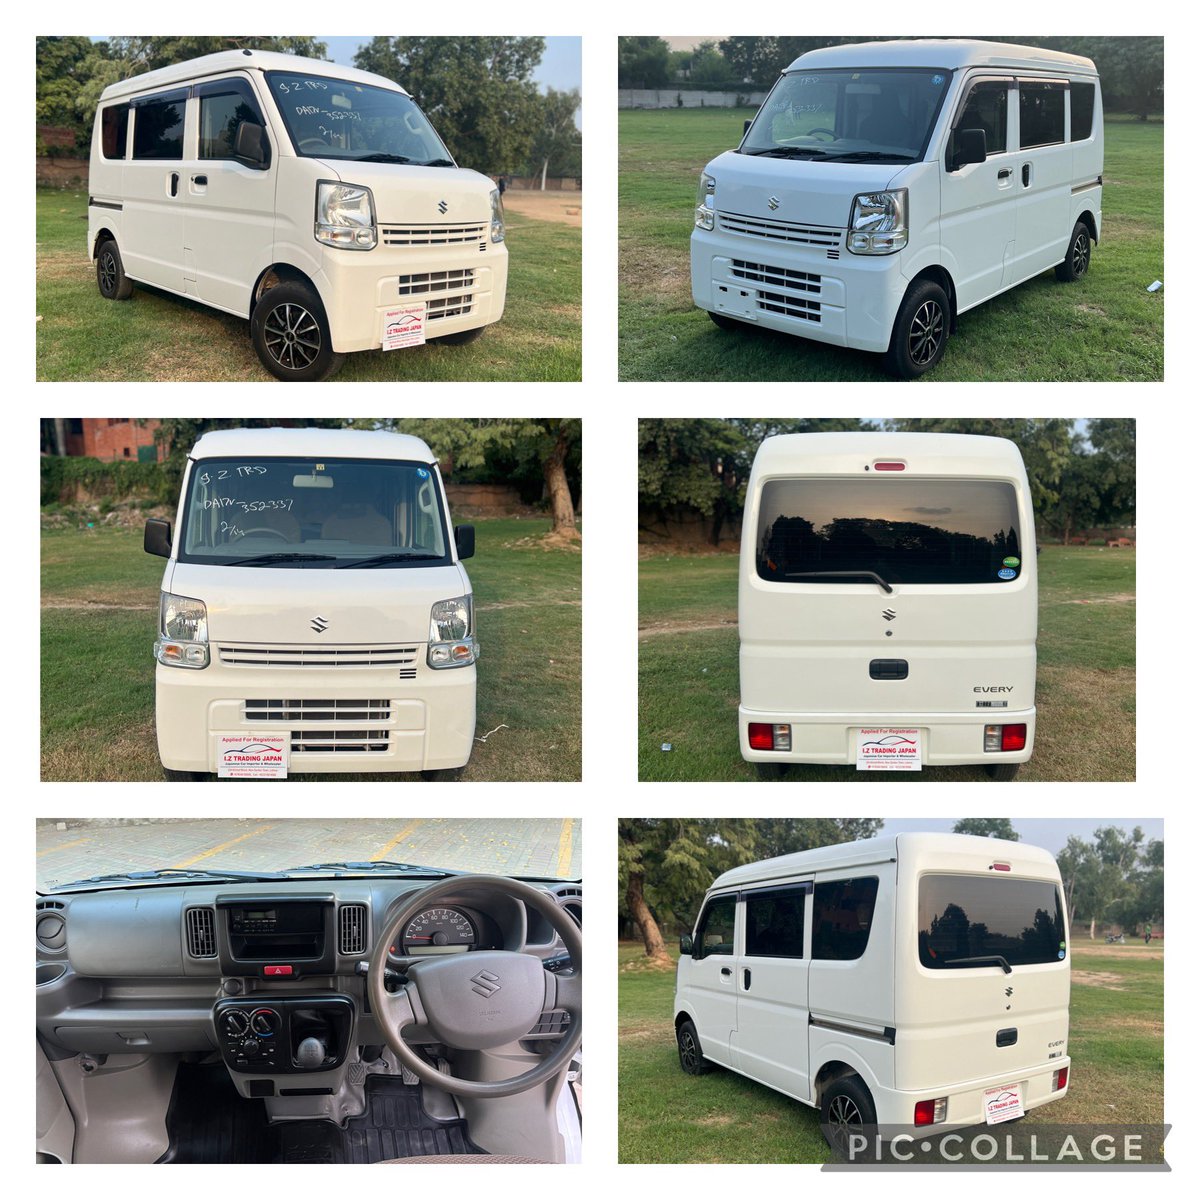 Suzuki Every PA Manual, 2018 Model, Fresh Import 2023, available for sale by I.Z Trading Japan, contact 03218818966
#suzuki #suzukievery #suzukieveryvan #carsofinstagram #carsforsaleinpakistan #japanesecars #importedcarsinpakistan #freshimport #pakistan #japanesecars